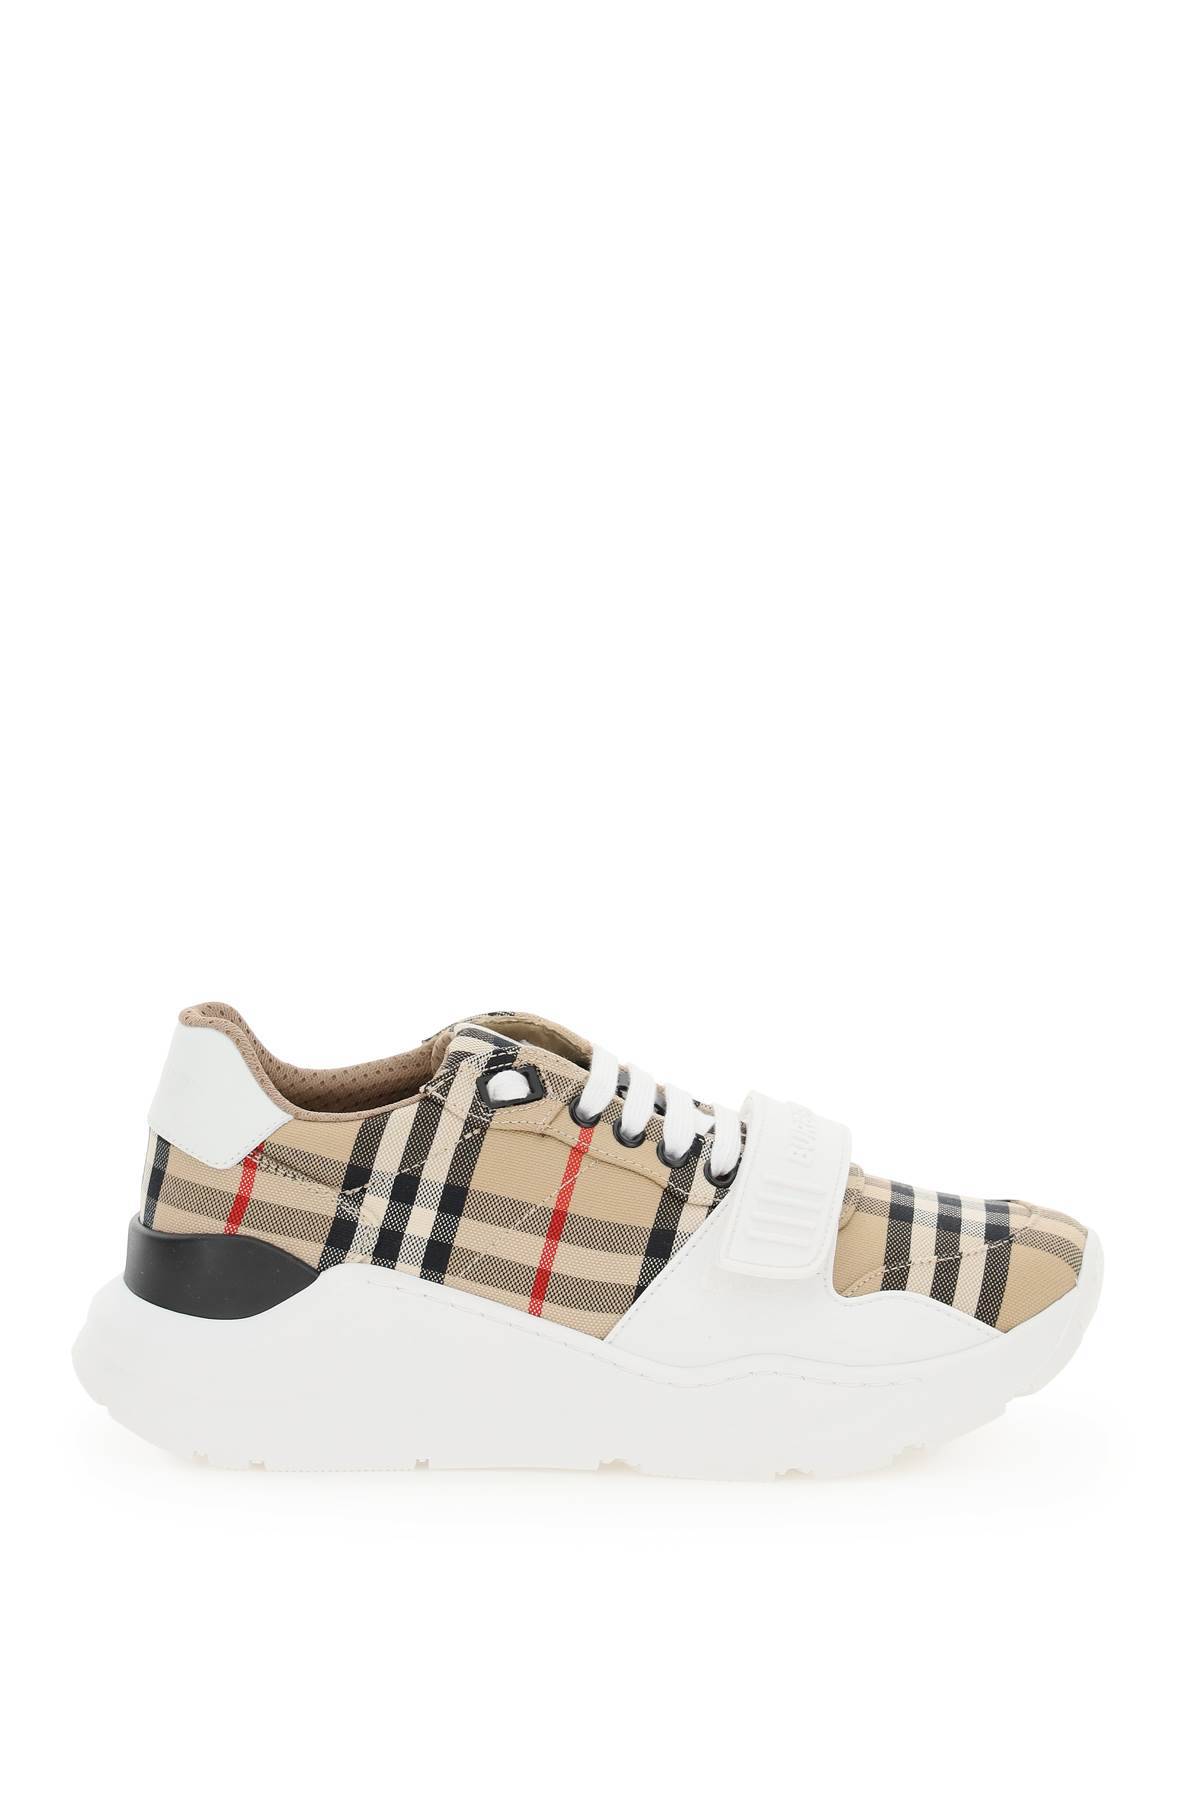 Burberry BURBERRY check sneakers